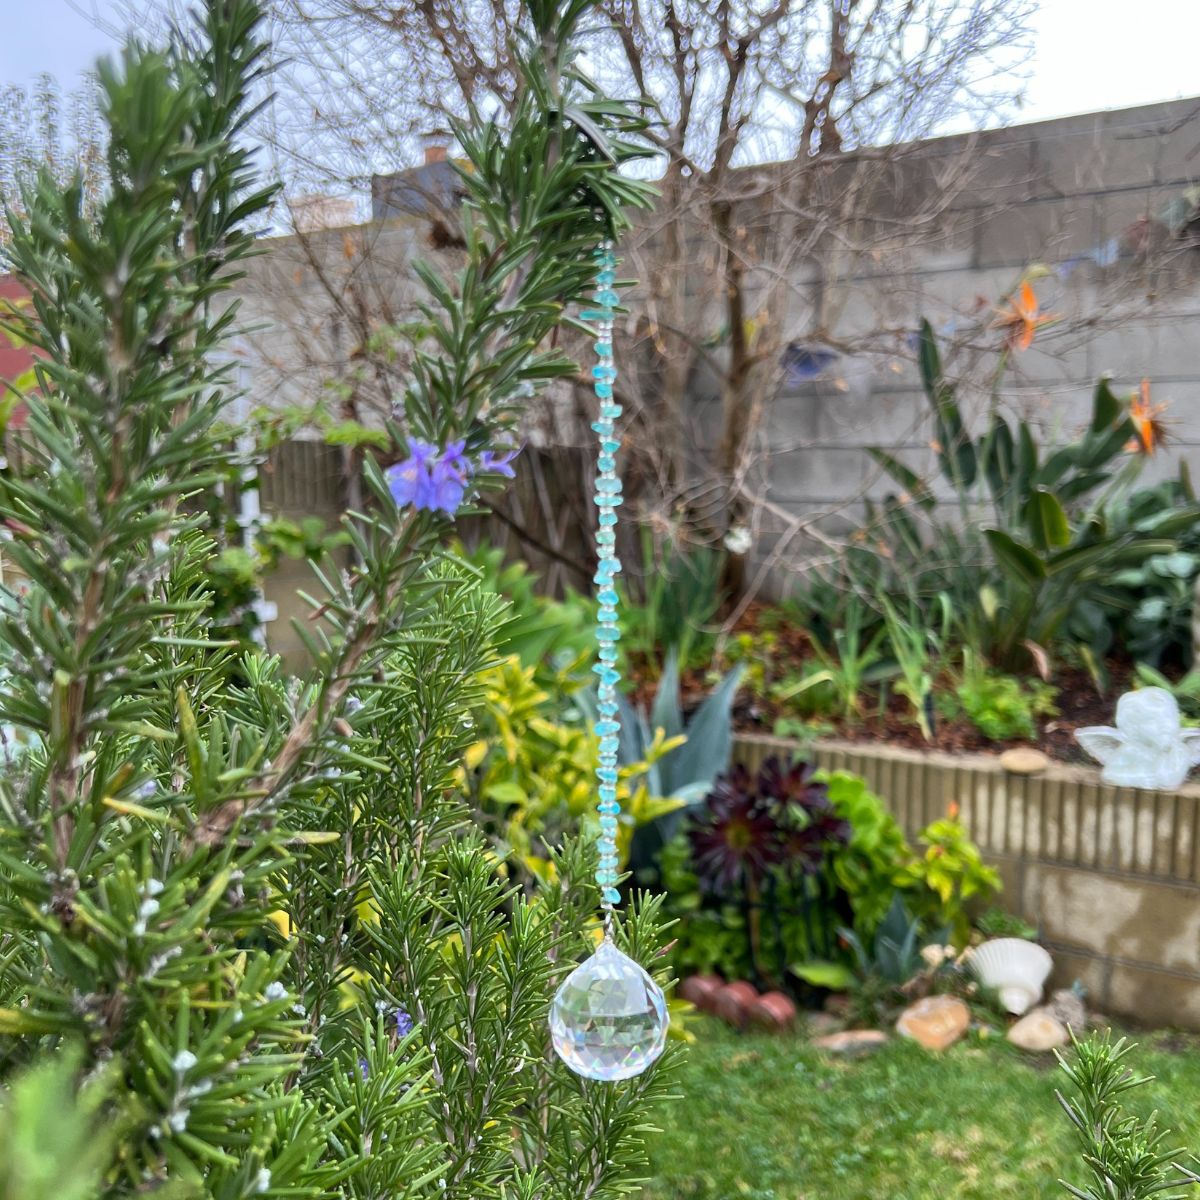  Use this Crystal Sun Catcher - Rainbow Maker as a keychain, a window decor or hang it on the rear view mirror in your car and enjoy the positivity the light brings to you.